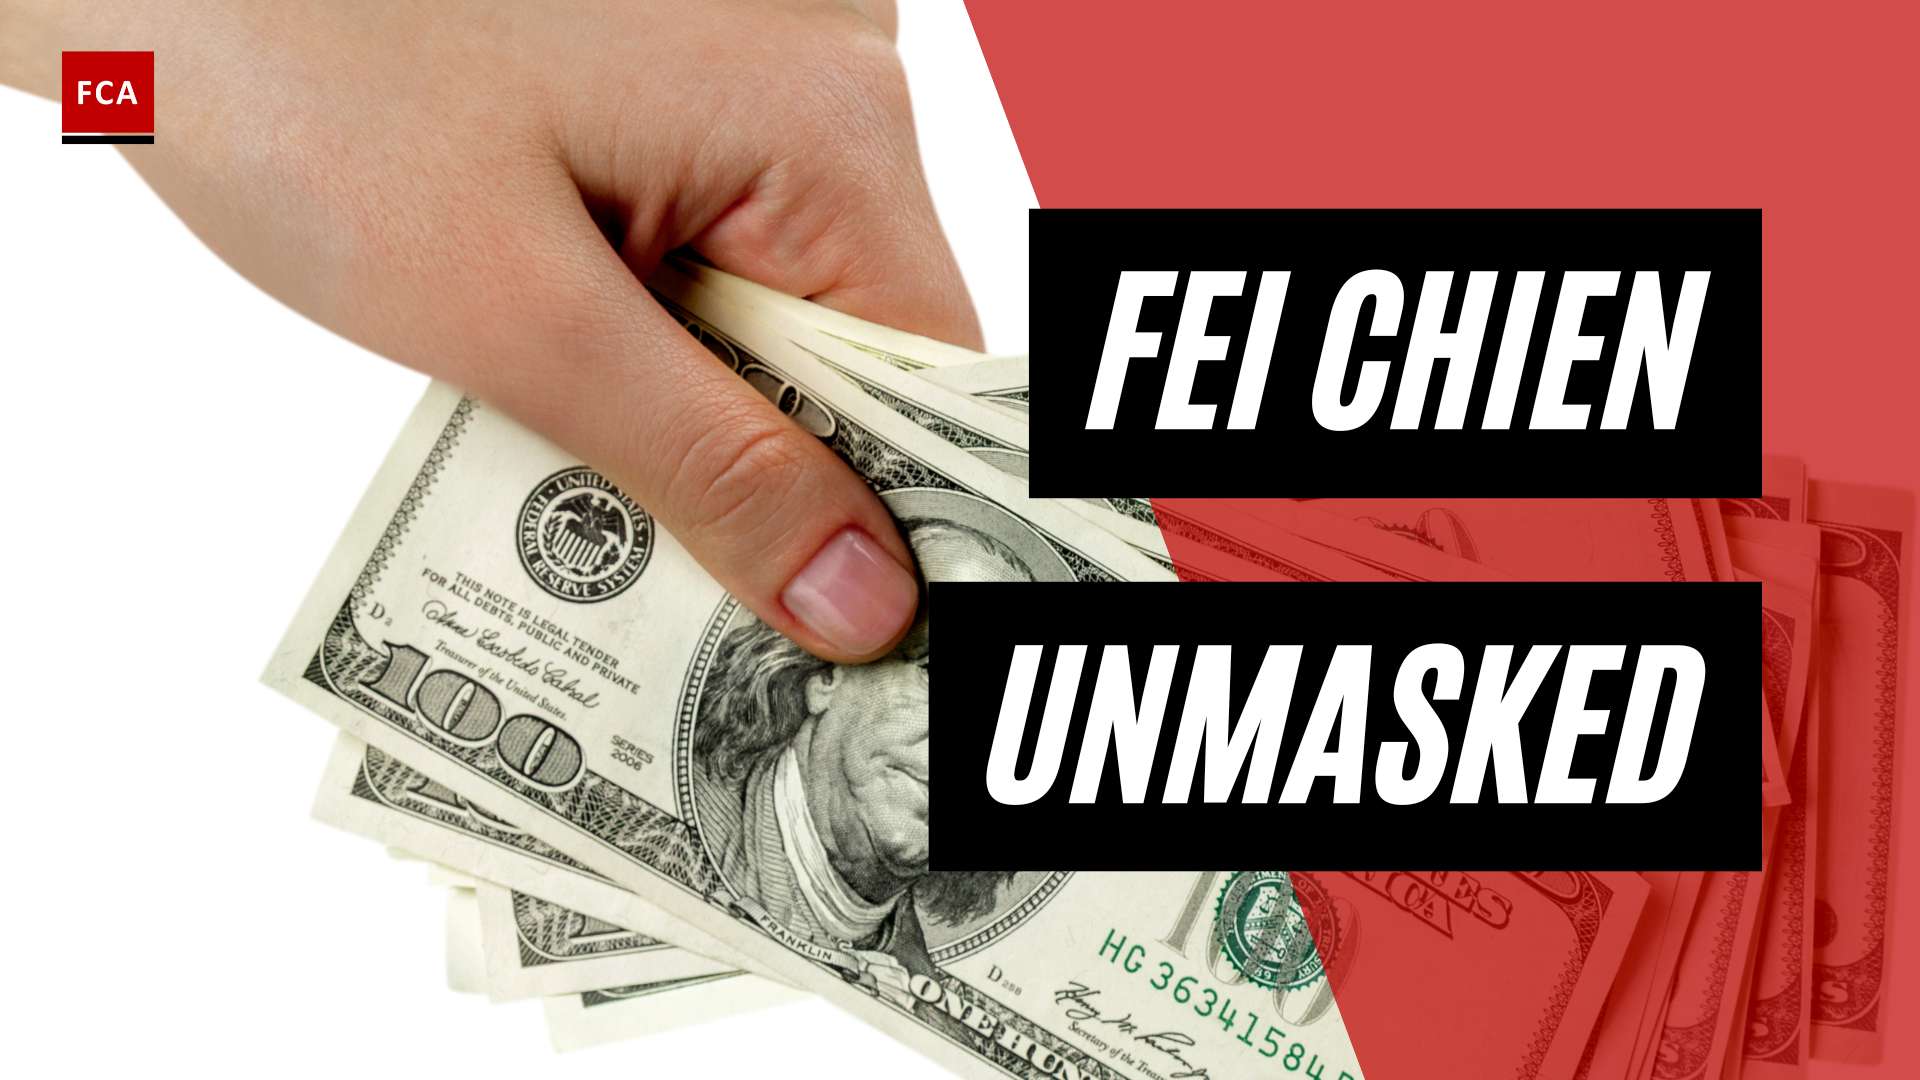 Fei Chien Unmasked: Exposing The Risks And Consequences Of This Money Laundering Scheme